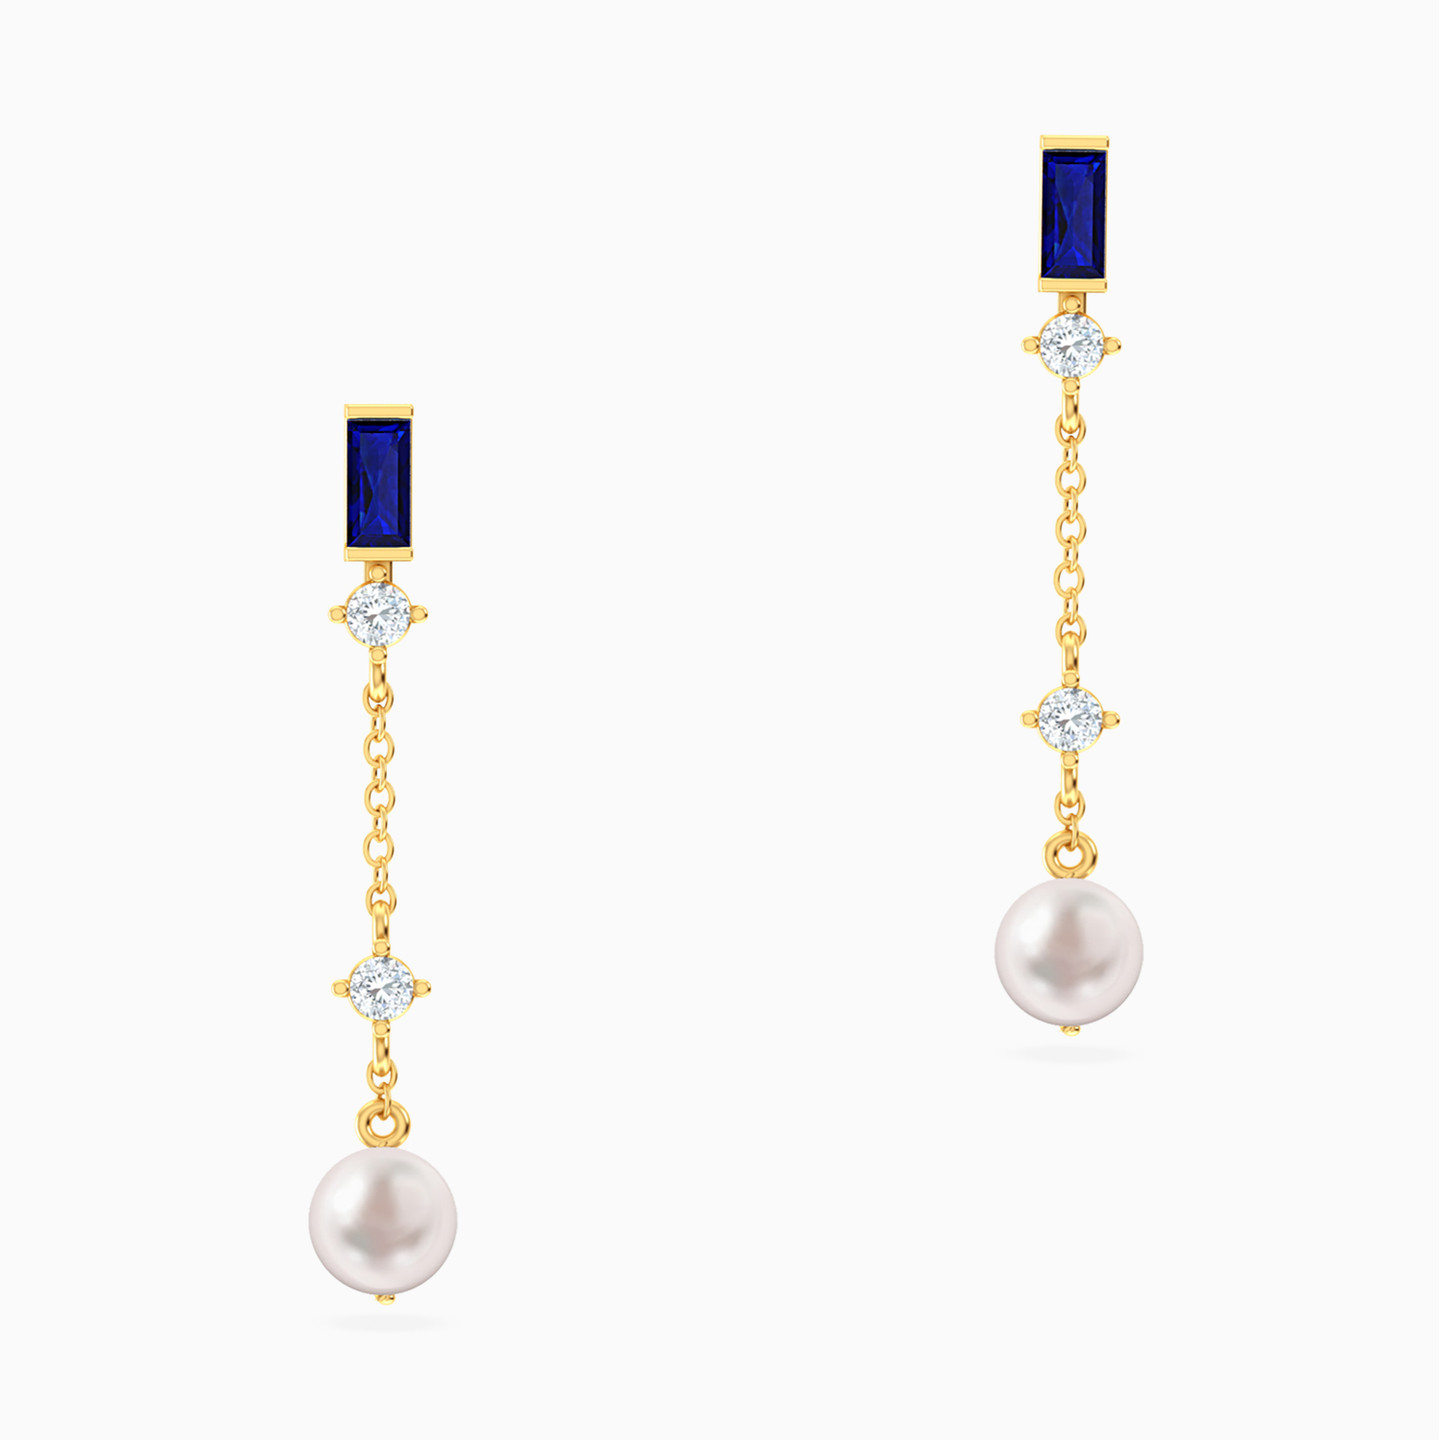 Round Pearls & Colored Stones Drop Earrings in 18K Gold